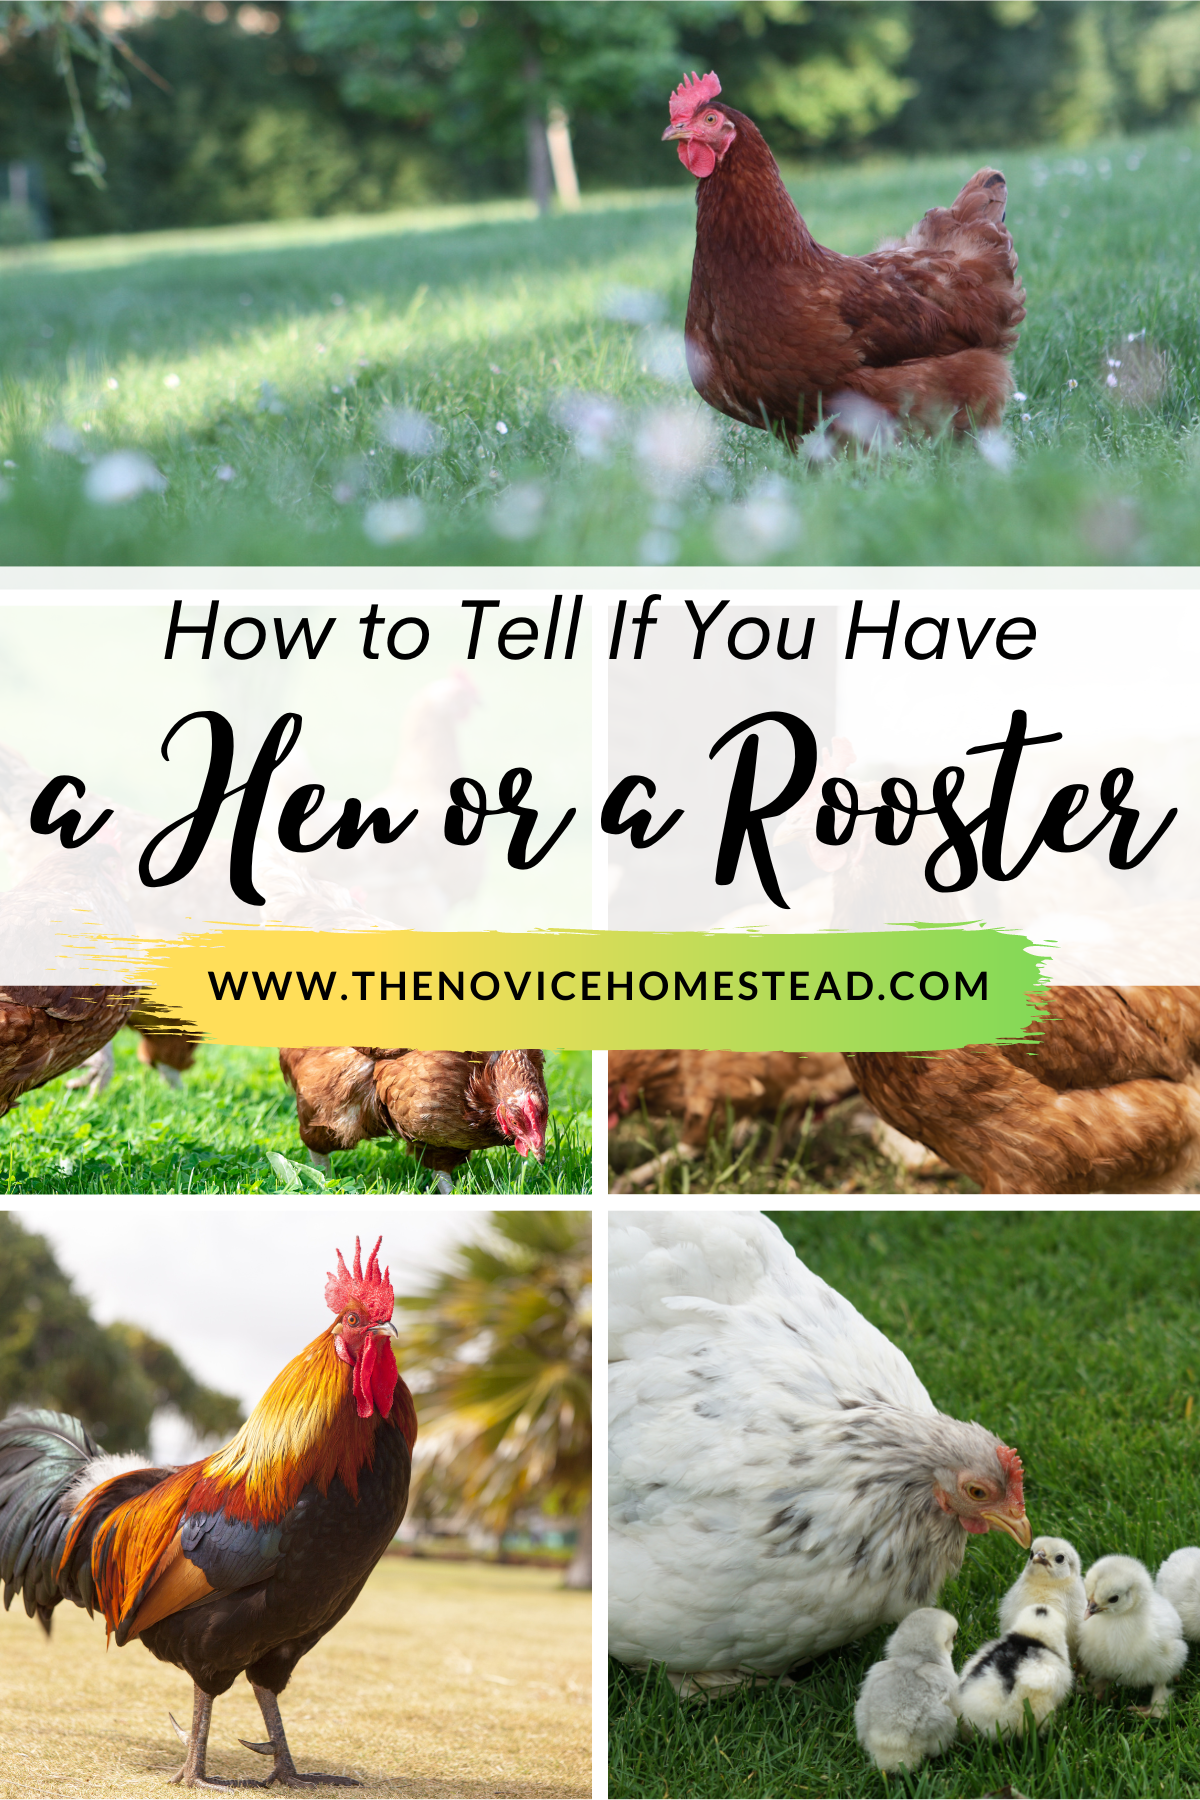 collage of chicken photos with text overlay "How to Tell if you Have a Hen or a Rooster"